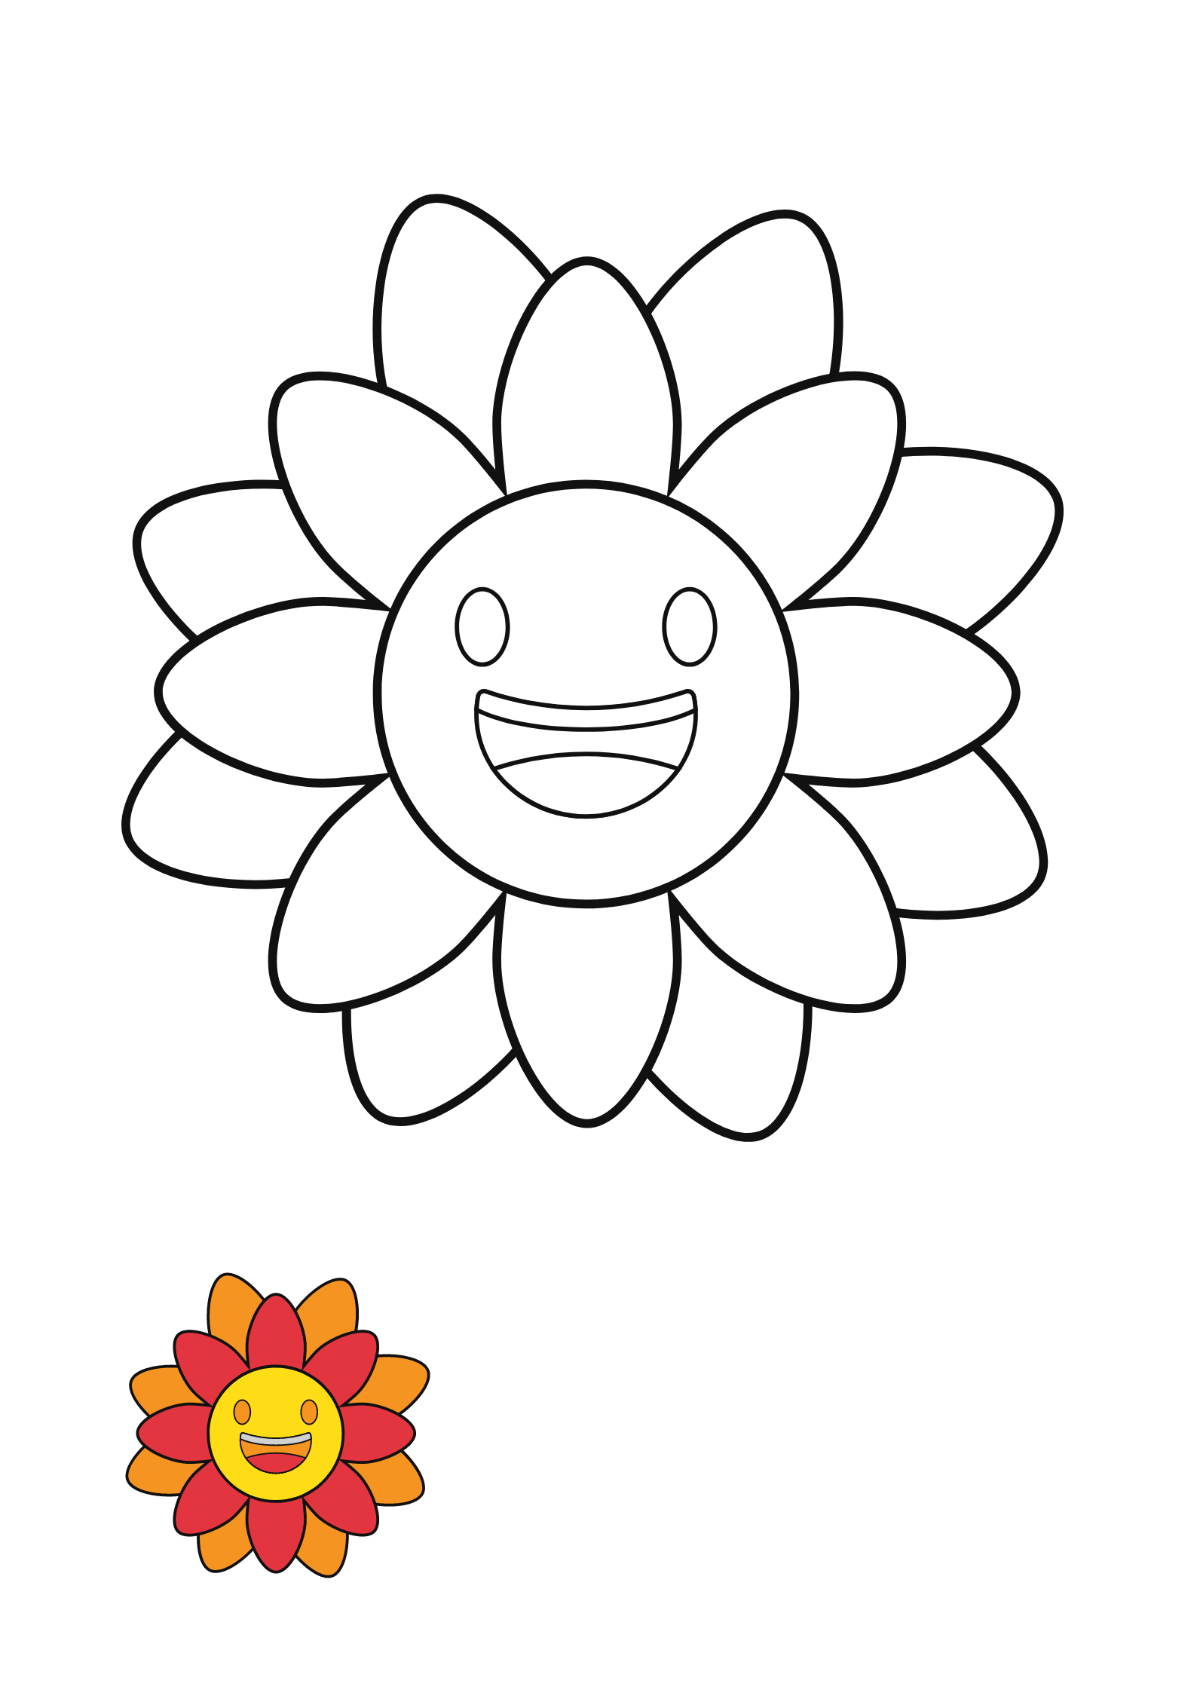 Flower Smiley coloring page